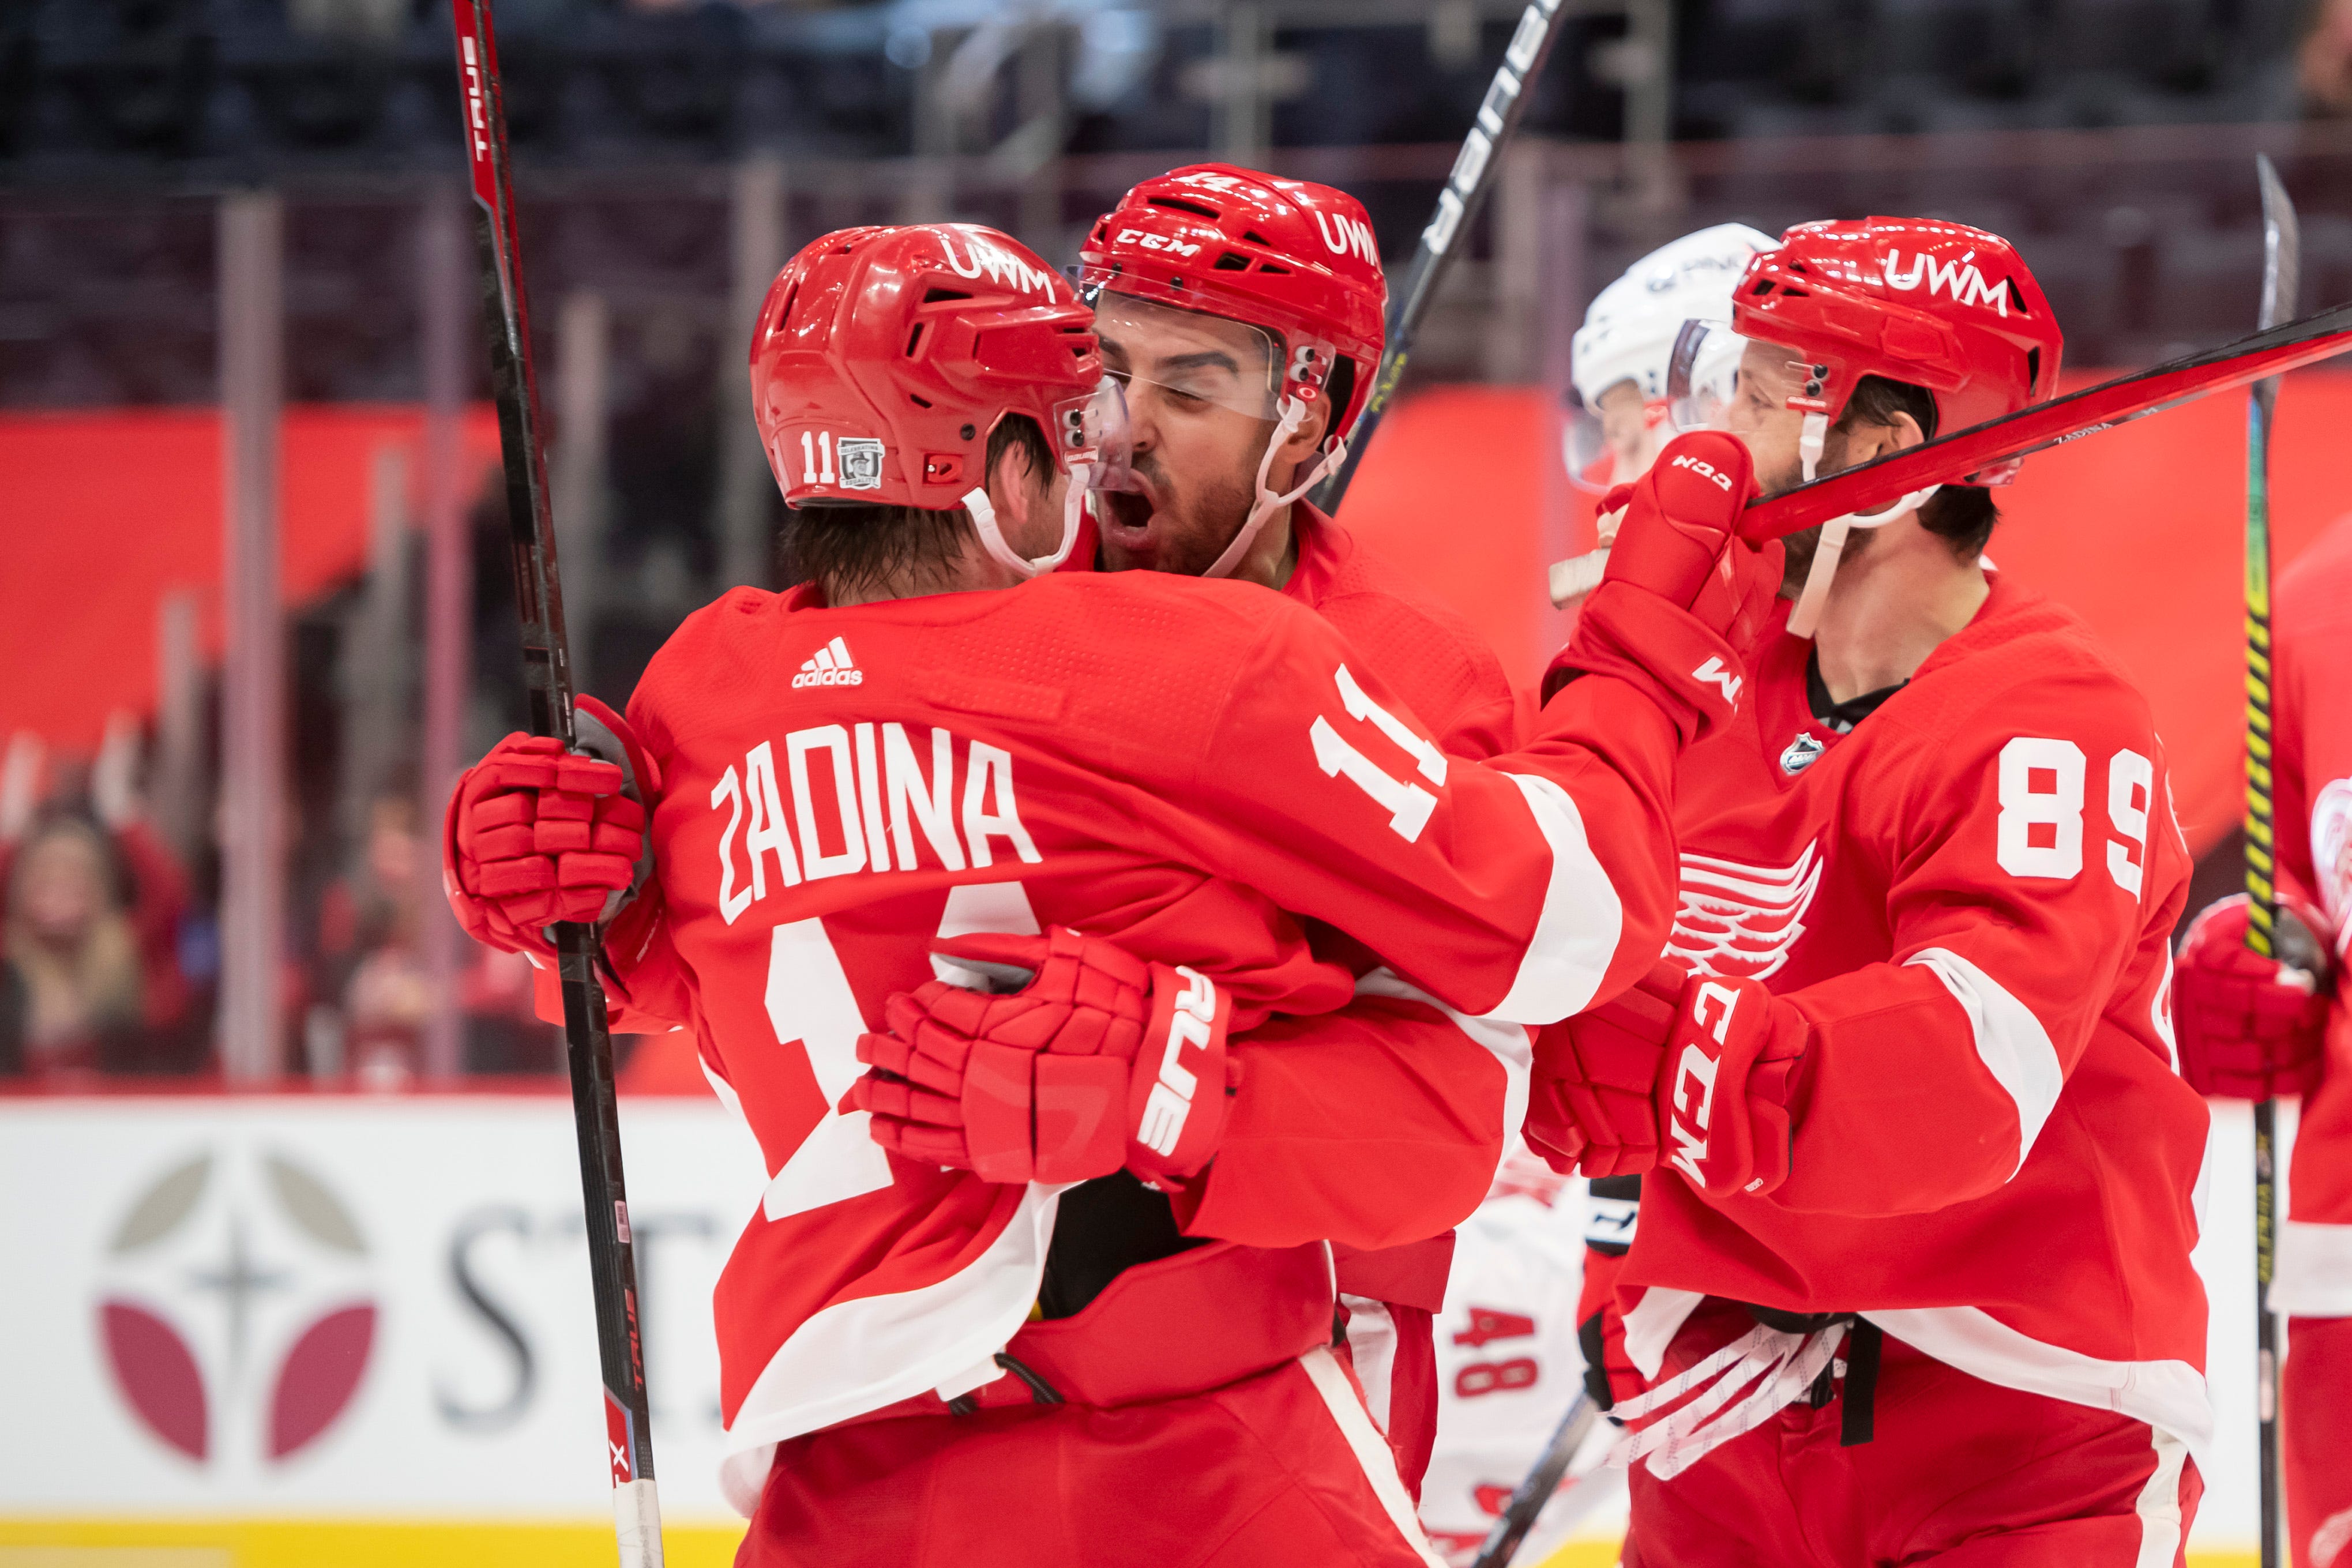 Detroit right wing Filip Zadina, left, and center Robby Fabbri celebrate after Fabbri scored a goal in the third period during a game between the Detroit Red Wings and the Carolina Hurricanes, at Little Caesars Arena, in Detroit, January 16, 2021. The Red Wings won the game, 4-2.